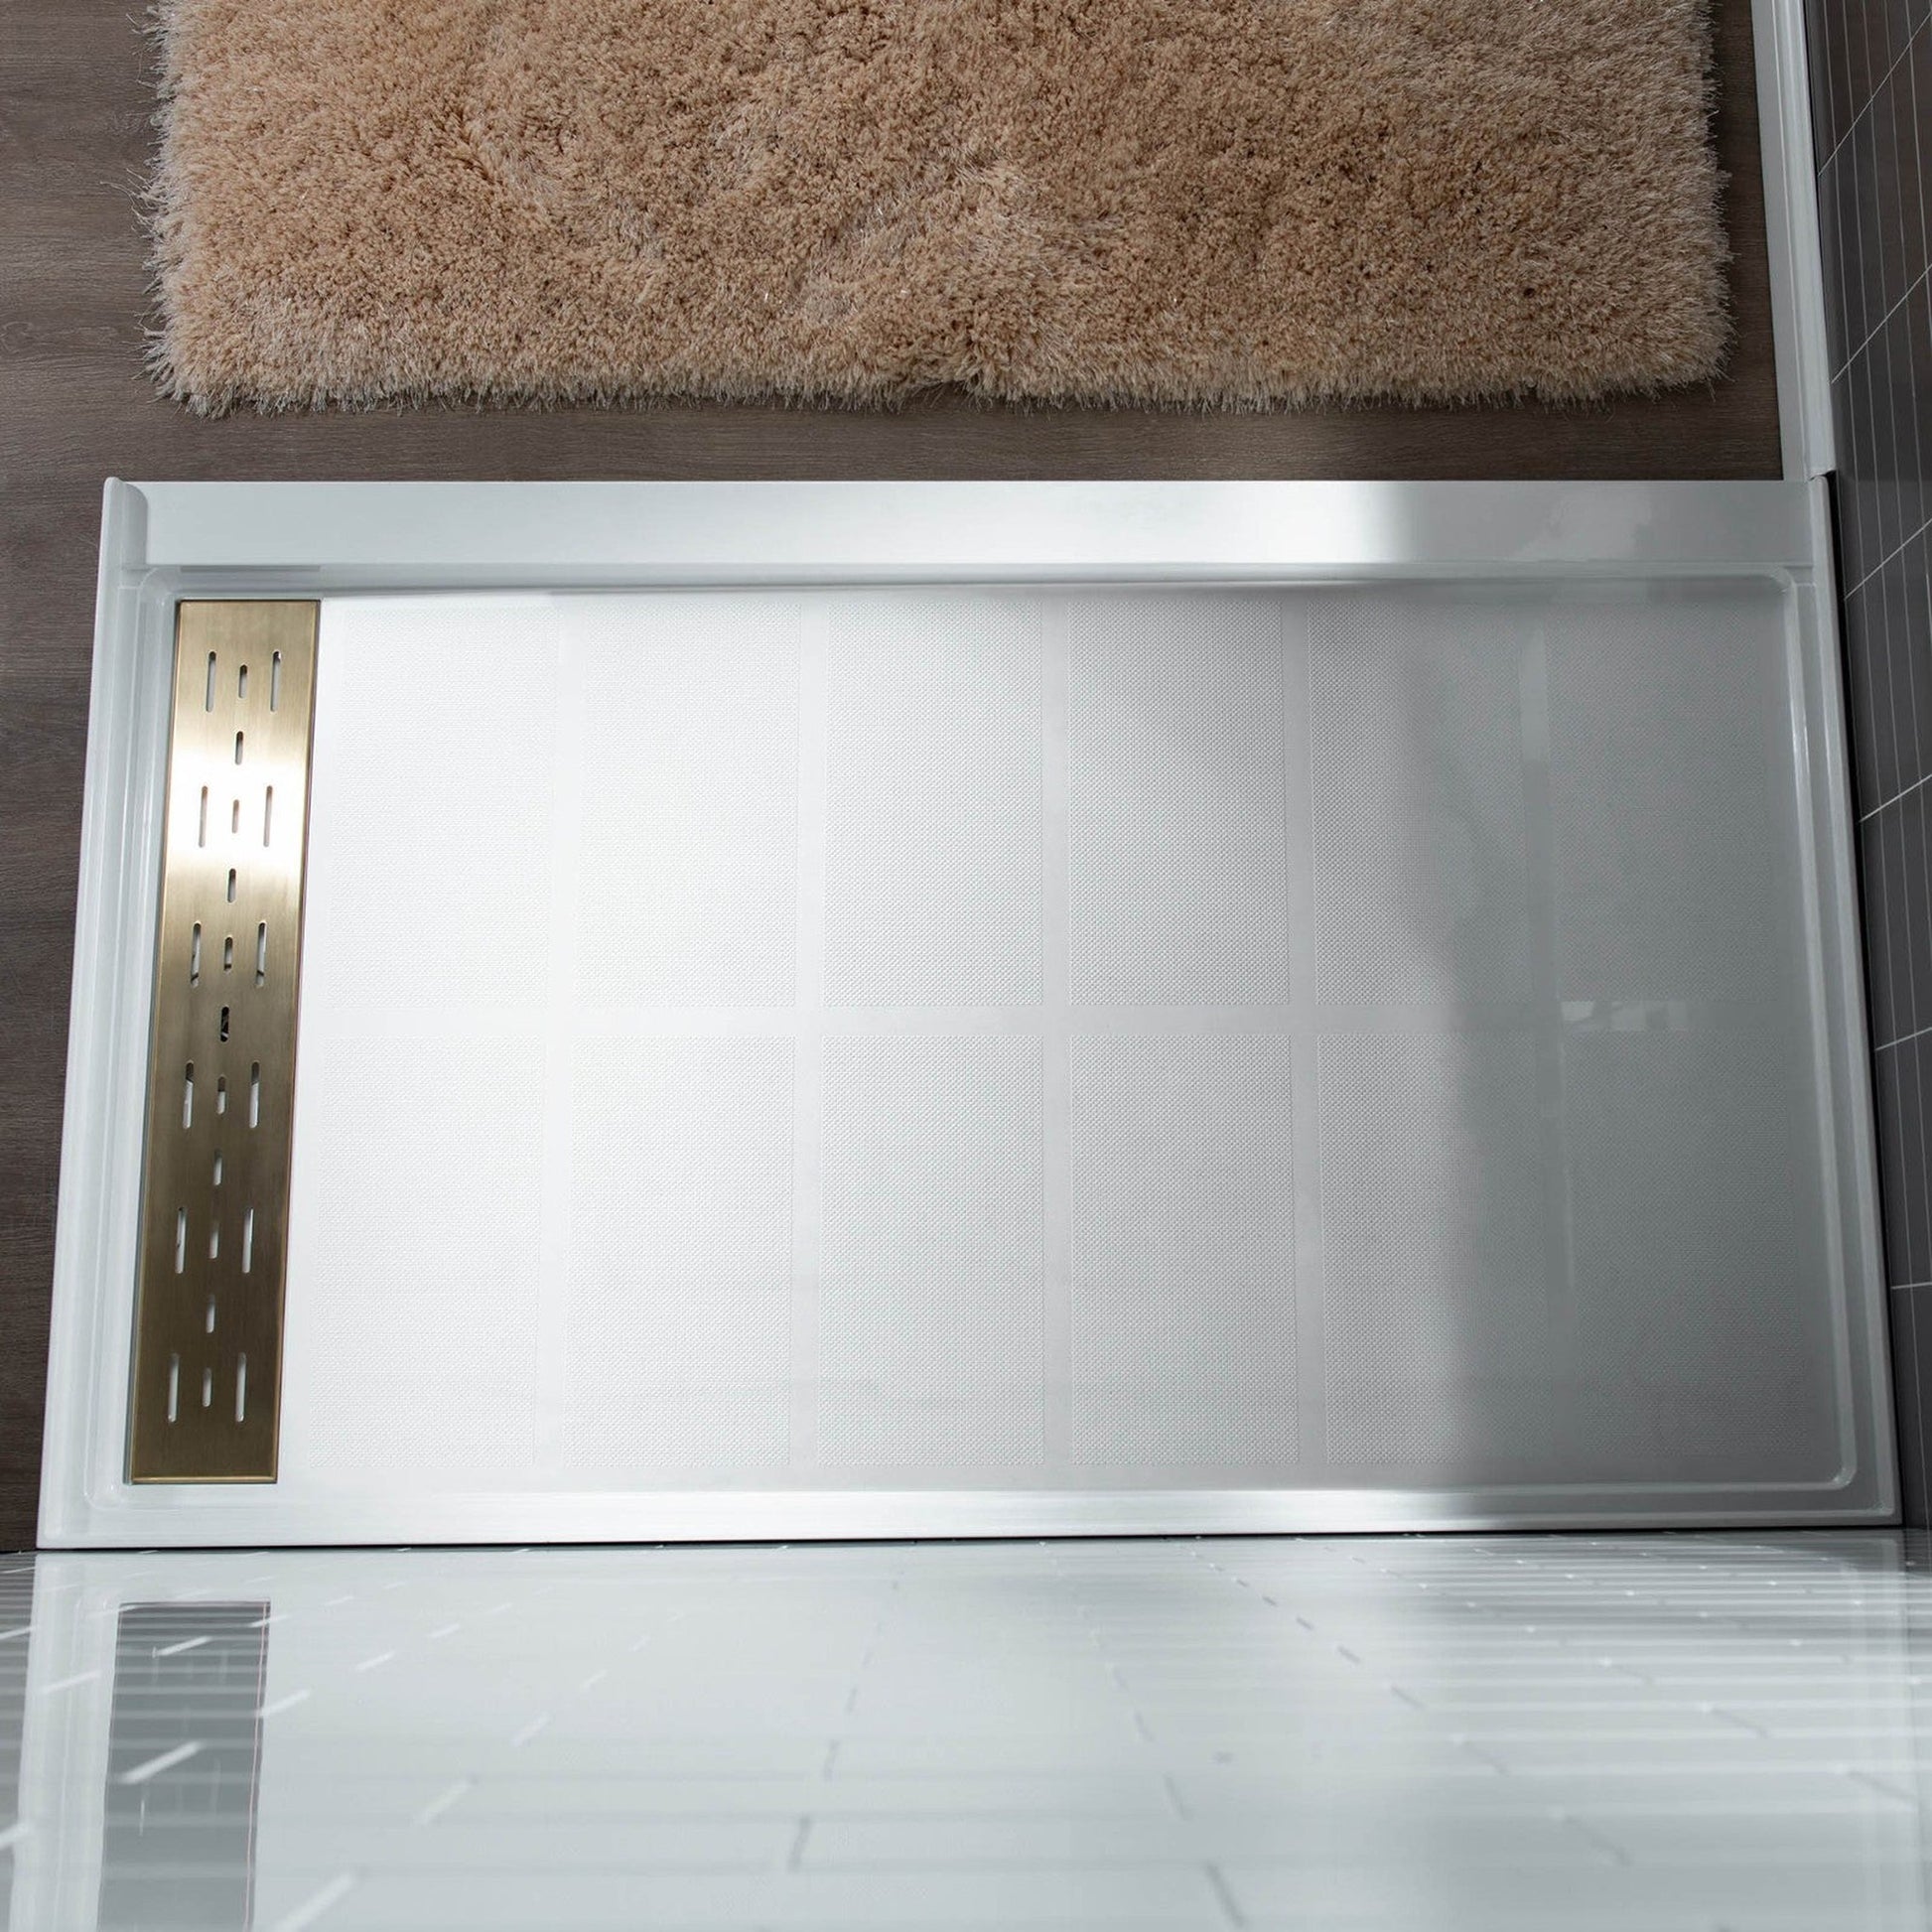 WoodBridge 60" x 36" White Solid Surface Shower Base Left Drain Location With Brushed Gold Trench Drain Cover